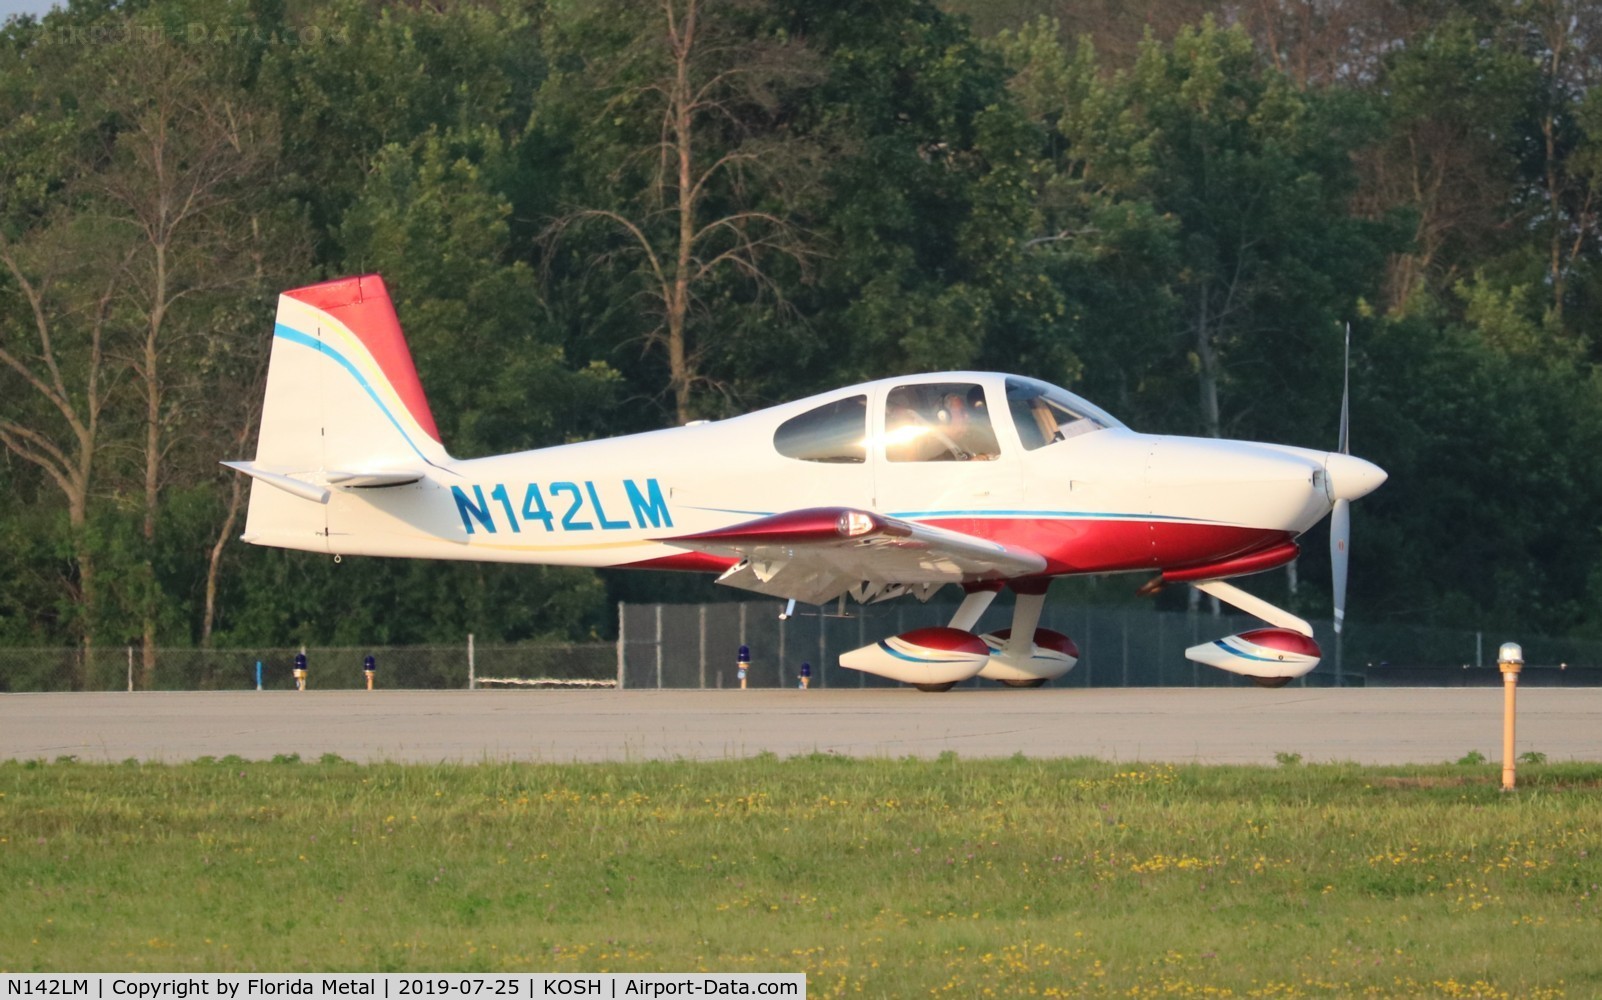 N142LM, 2015 Vans RV-10 C/N 41420, OSH 2019 (some strange reason the tag was showing it was a G-IV, when I am smart enough to know the difference between a G-IV and RV10 - no record of this tail number being on a G-IV either.